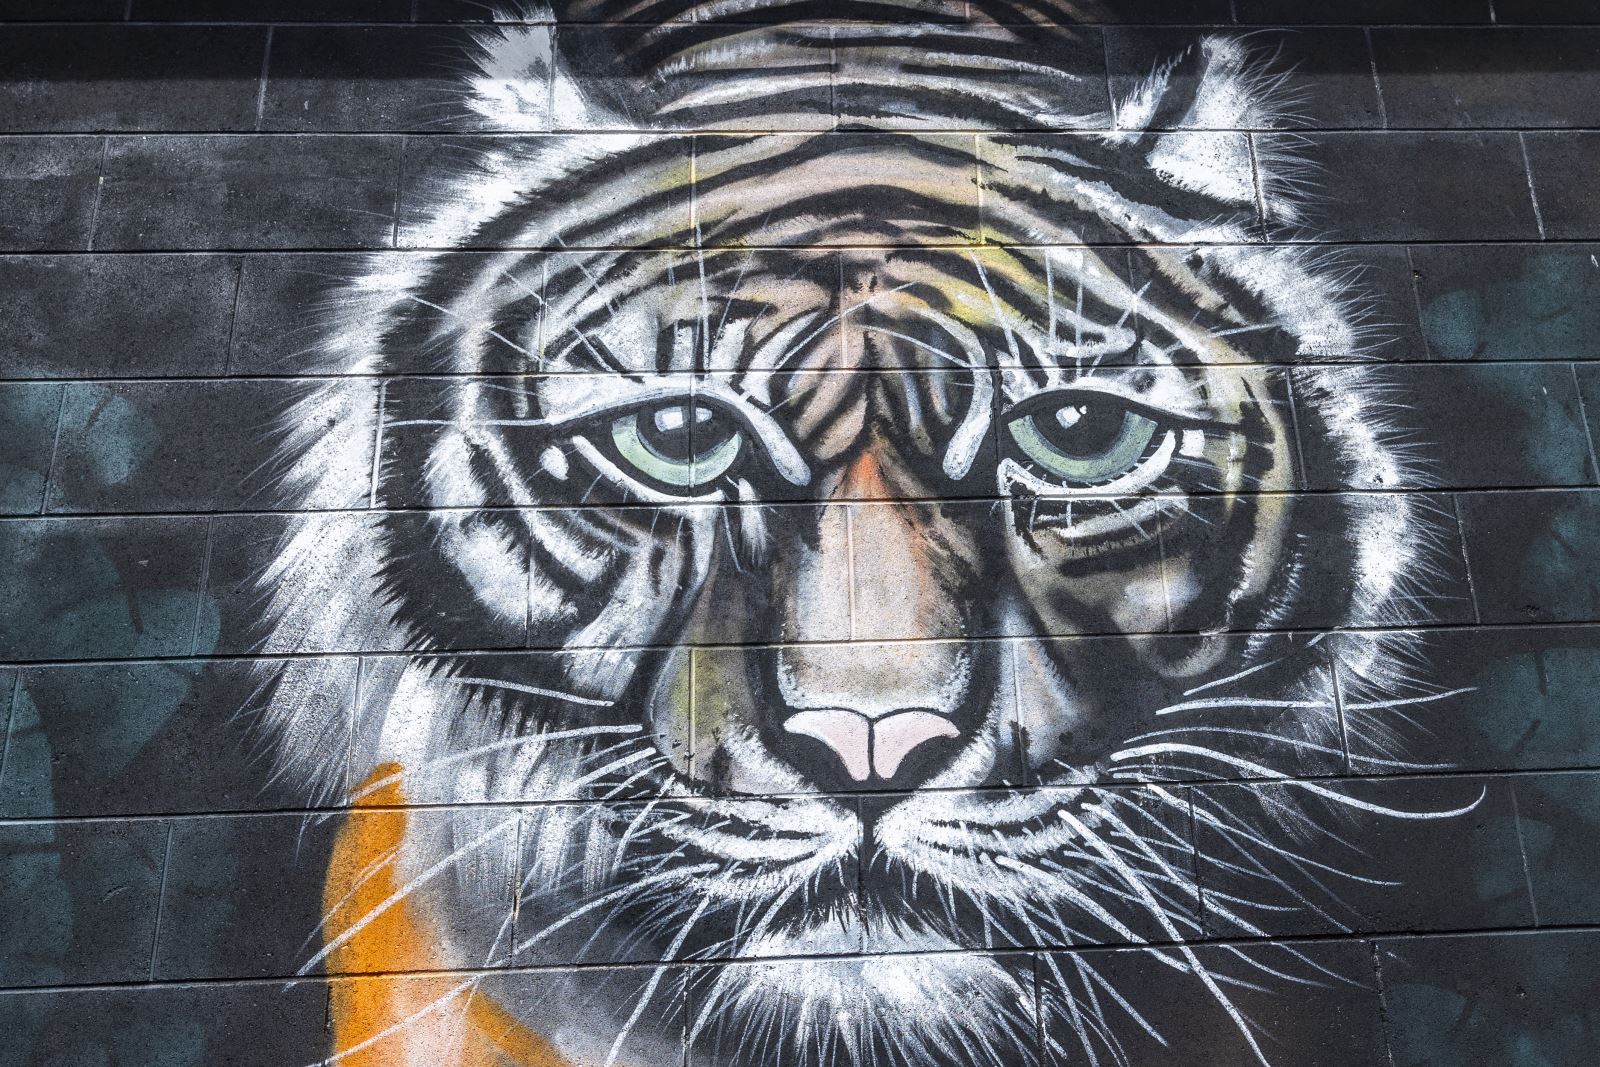 Street art of a tiger's face painted on a brick wall